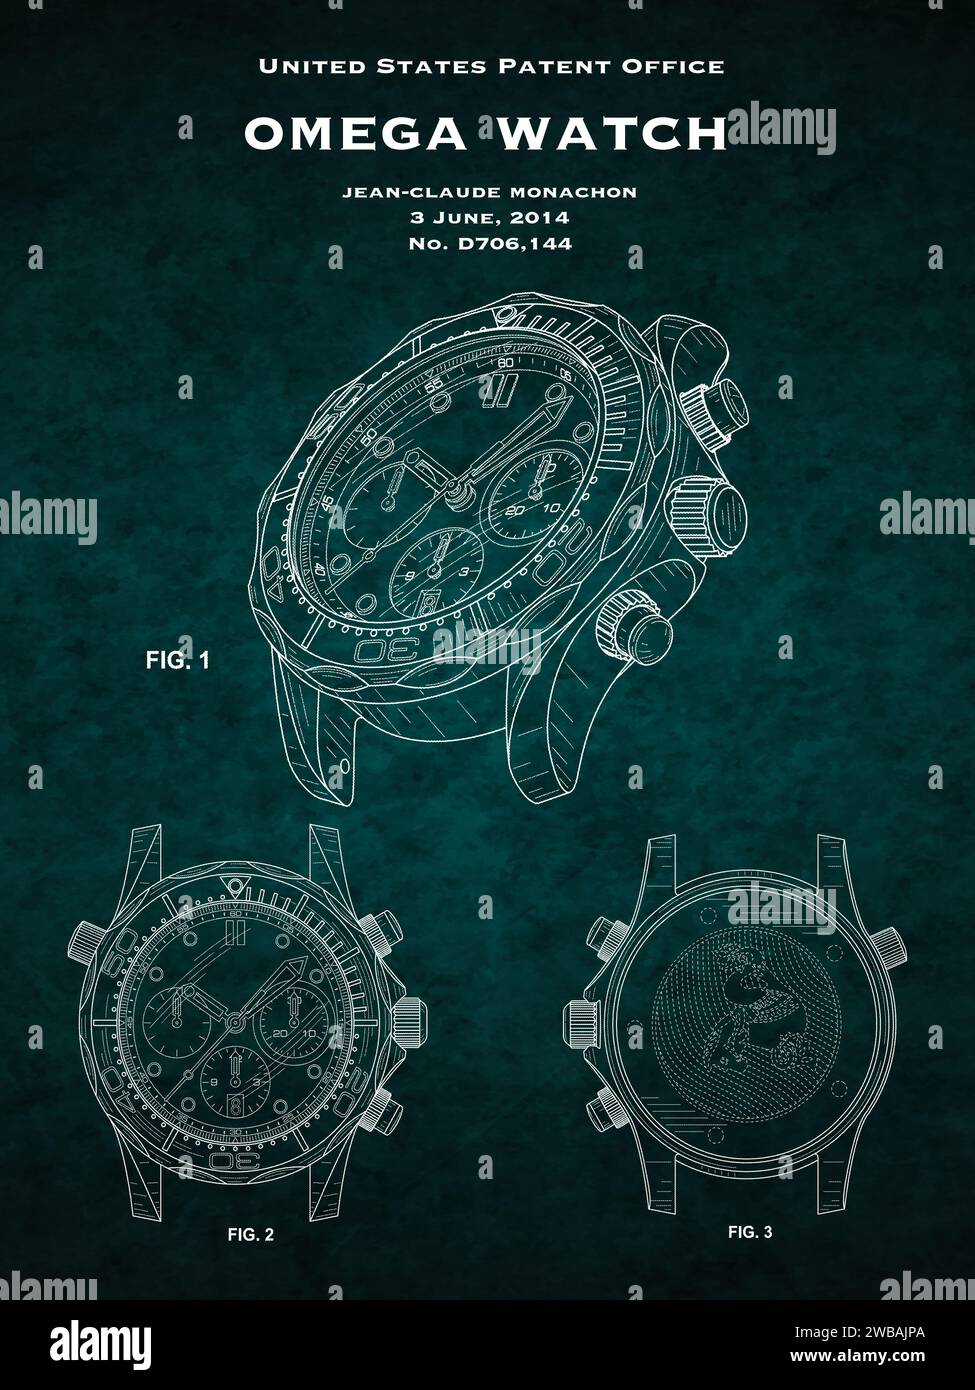 US patent design from 2014 for an Omega dive watch design on a green background Stock Photo